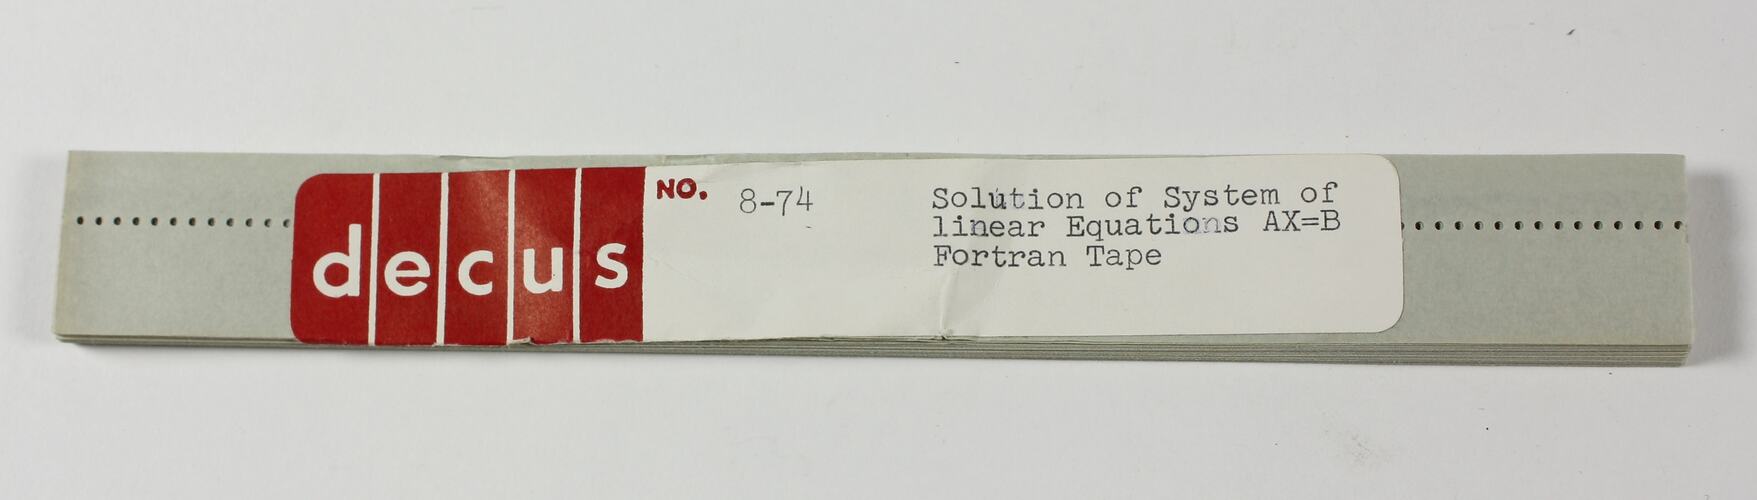 Paper Tape - DECUS, '8-74 Solution of System of Linear Equations AX=B, Fortran Tape'